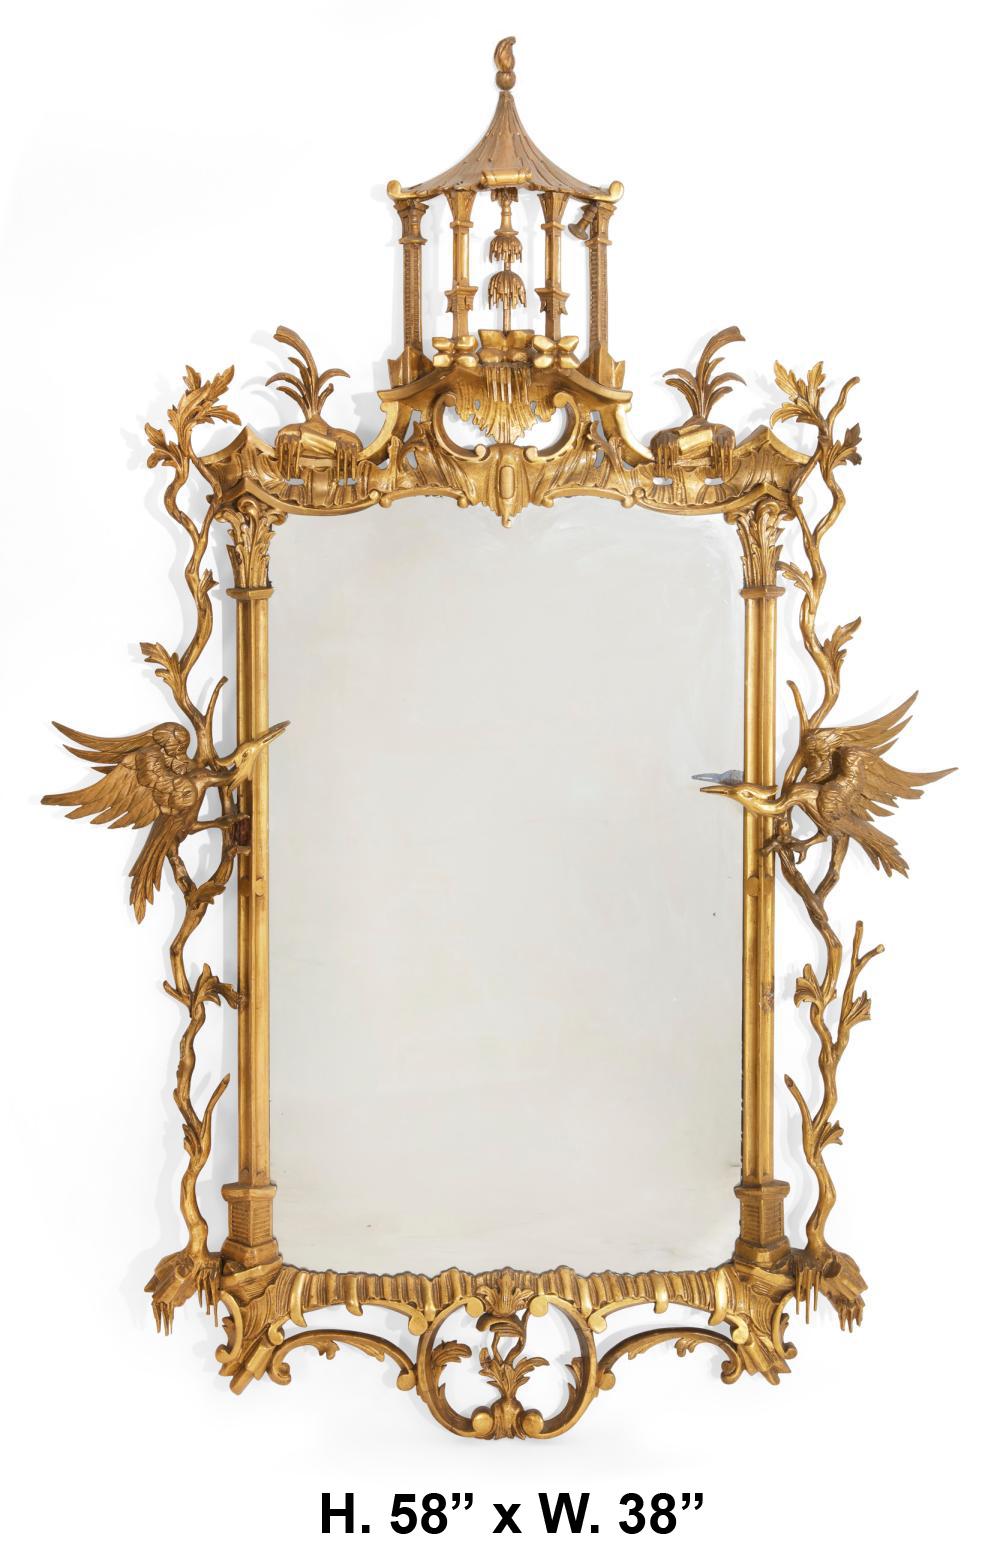 Exceptional 19c Chippendale style carved giltwood mirror with hoho birds..
Extremely fine carved giltwood with meticulous attention has been given to every details all around.
The gilding is in a very good condition. it is one of the most elegant